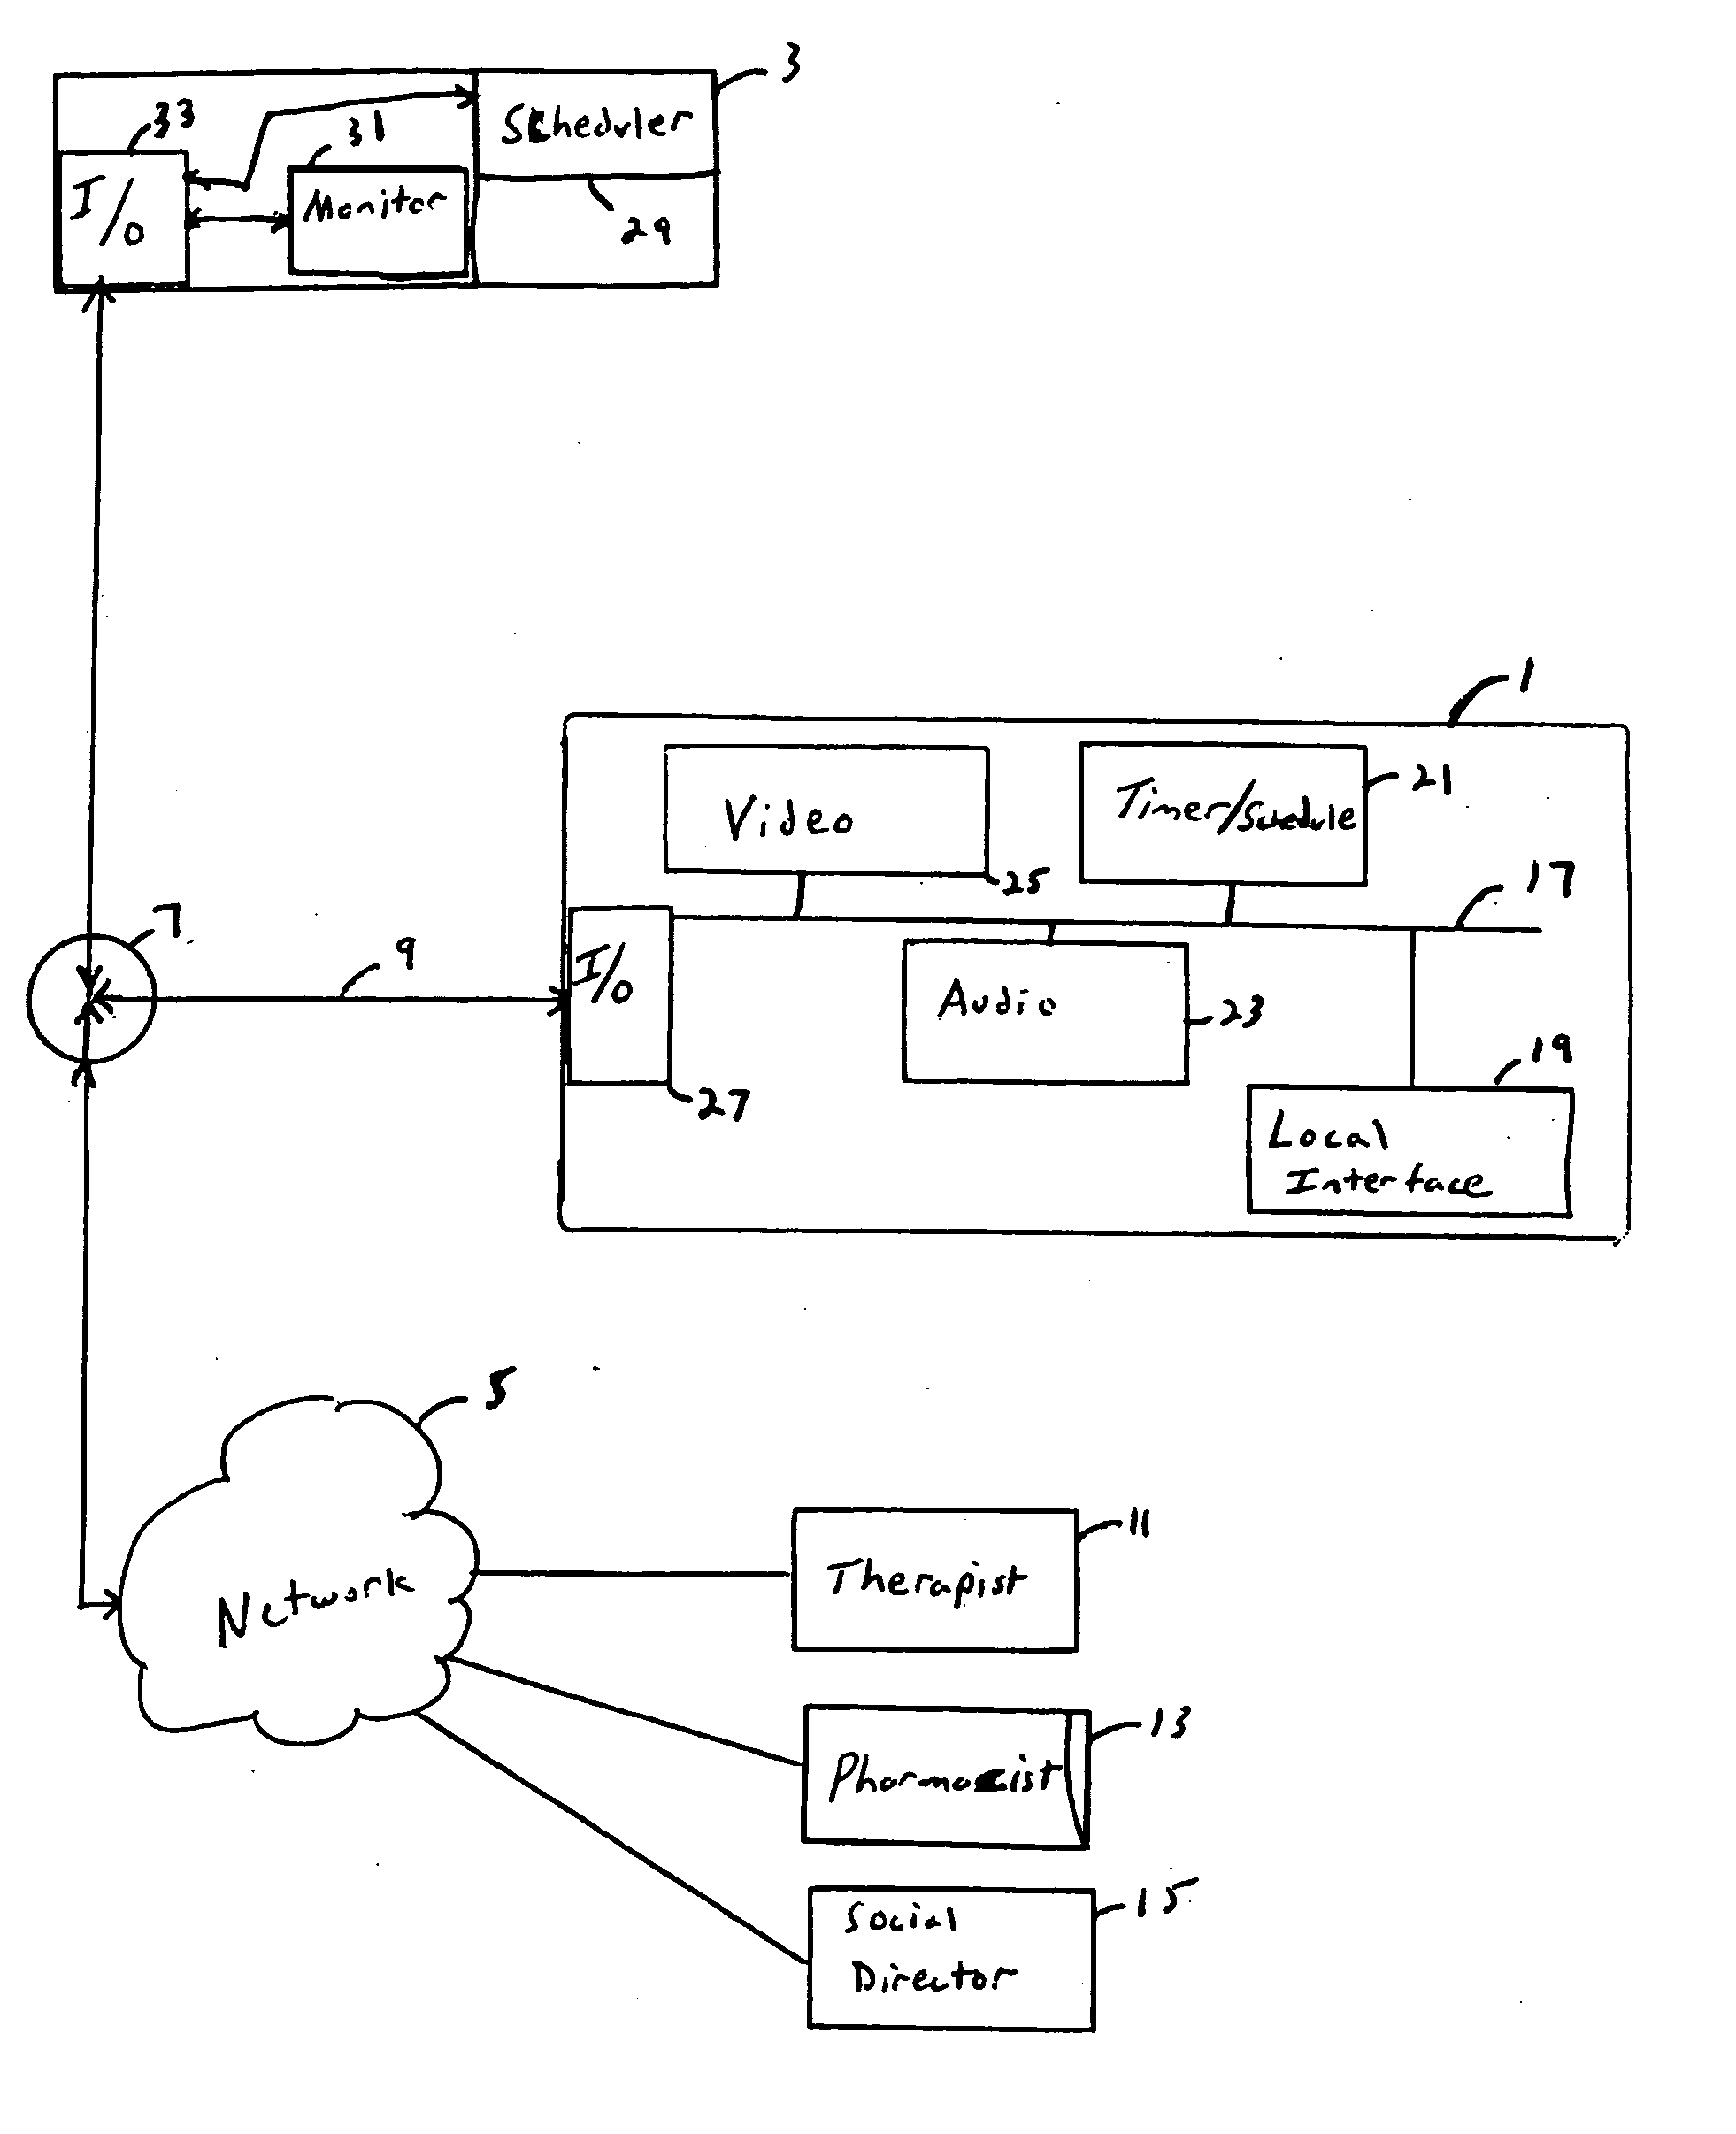 Computer-automated system and method of assessing the orientation, awareness and responses of a person with reduced capacity